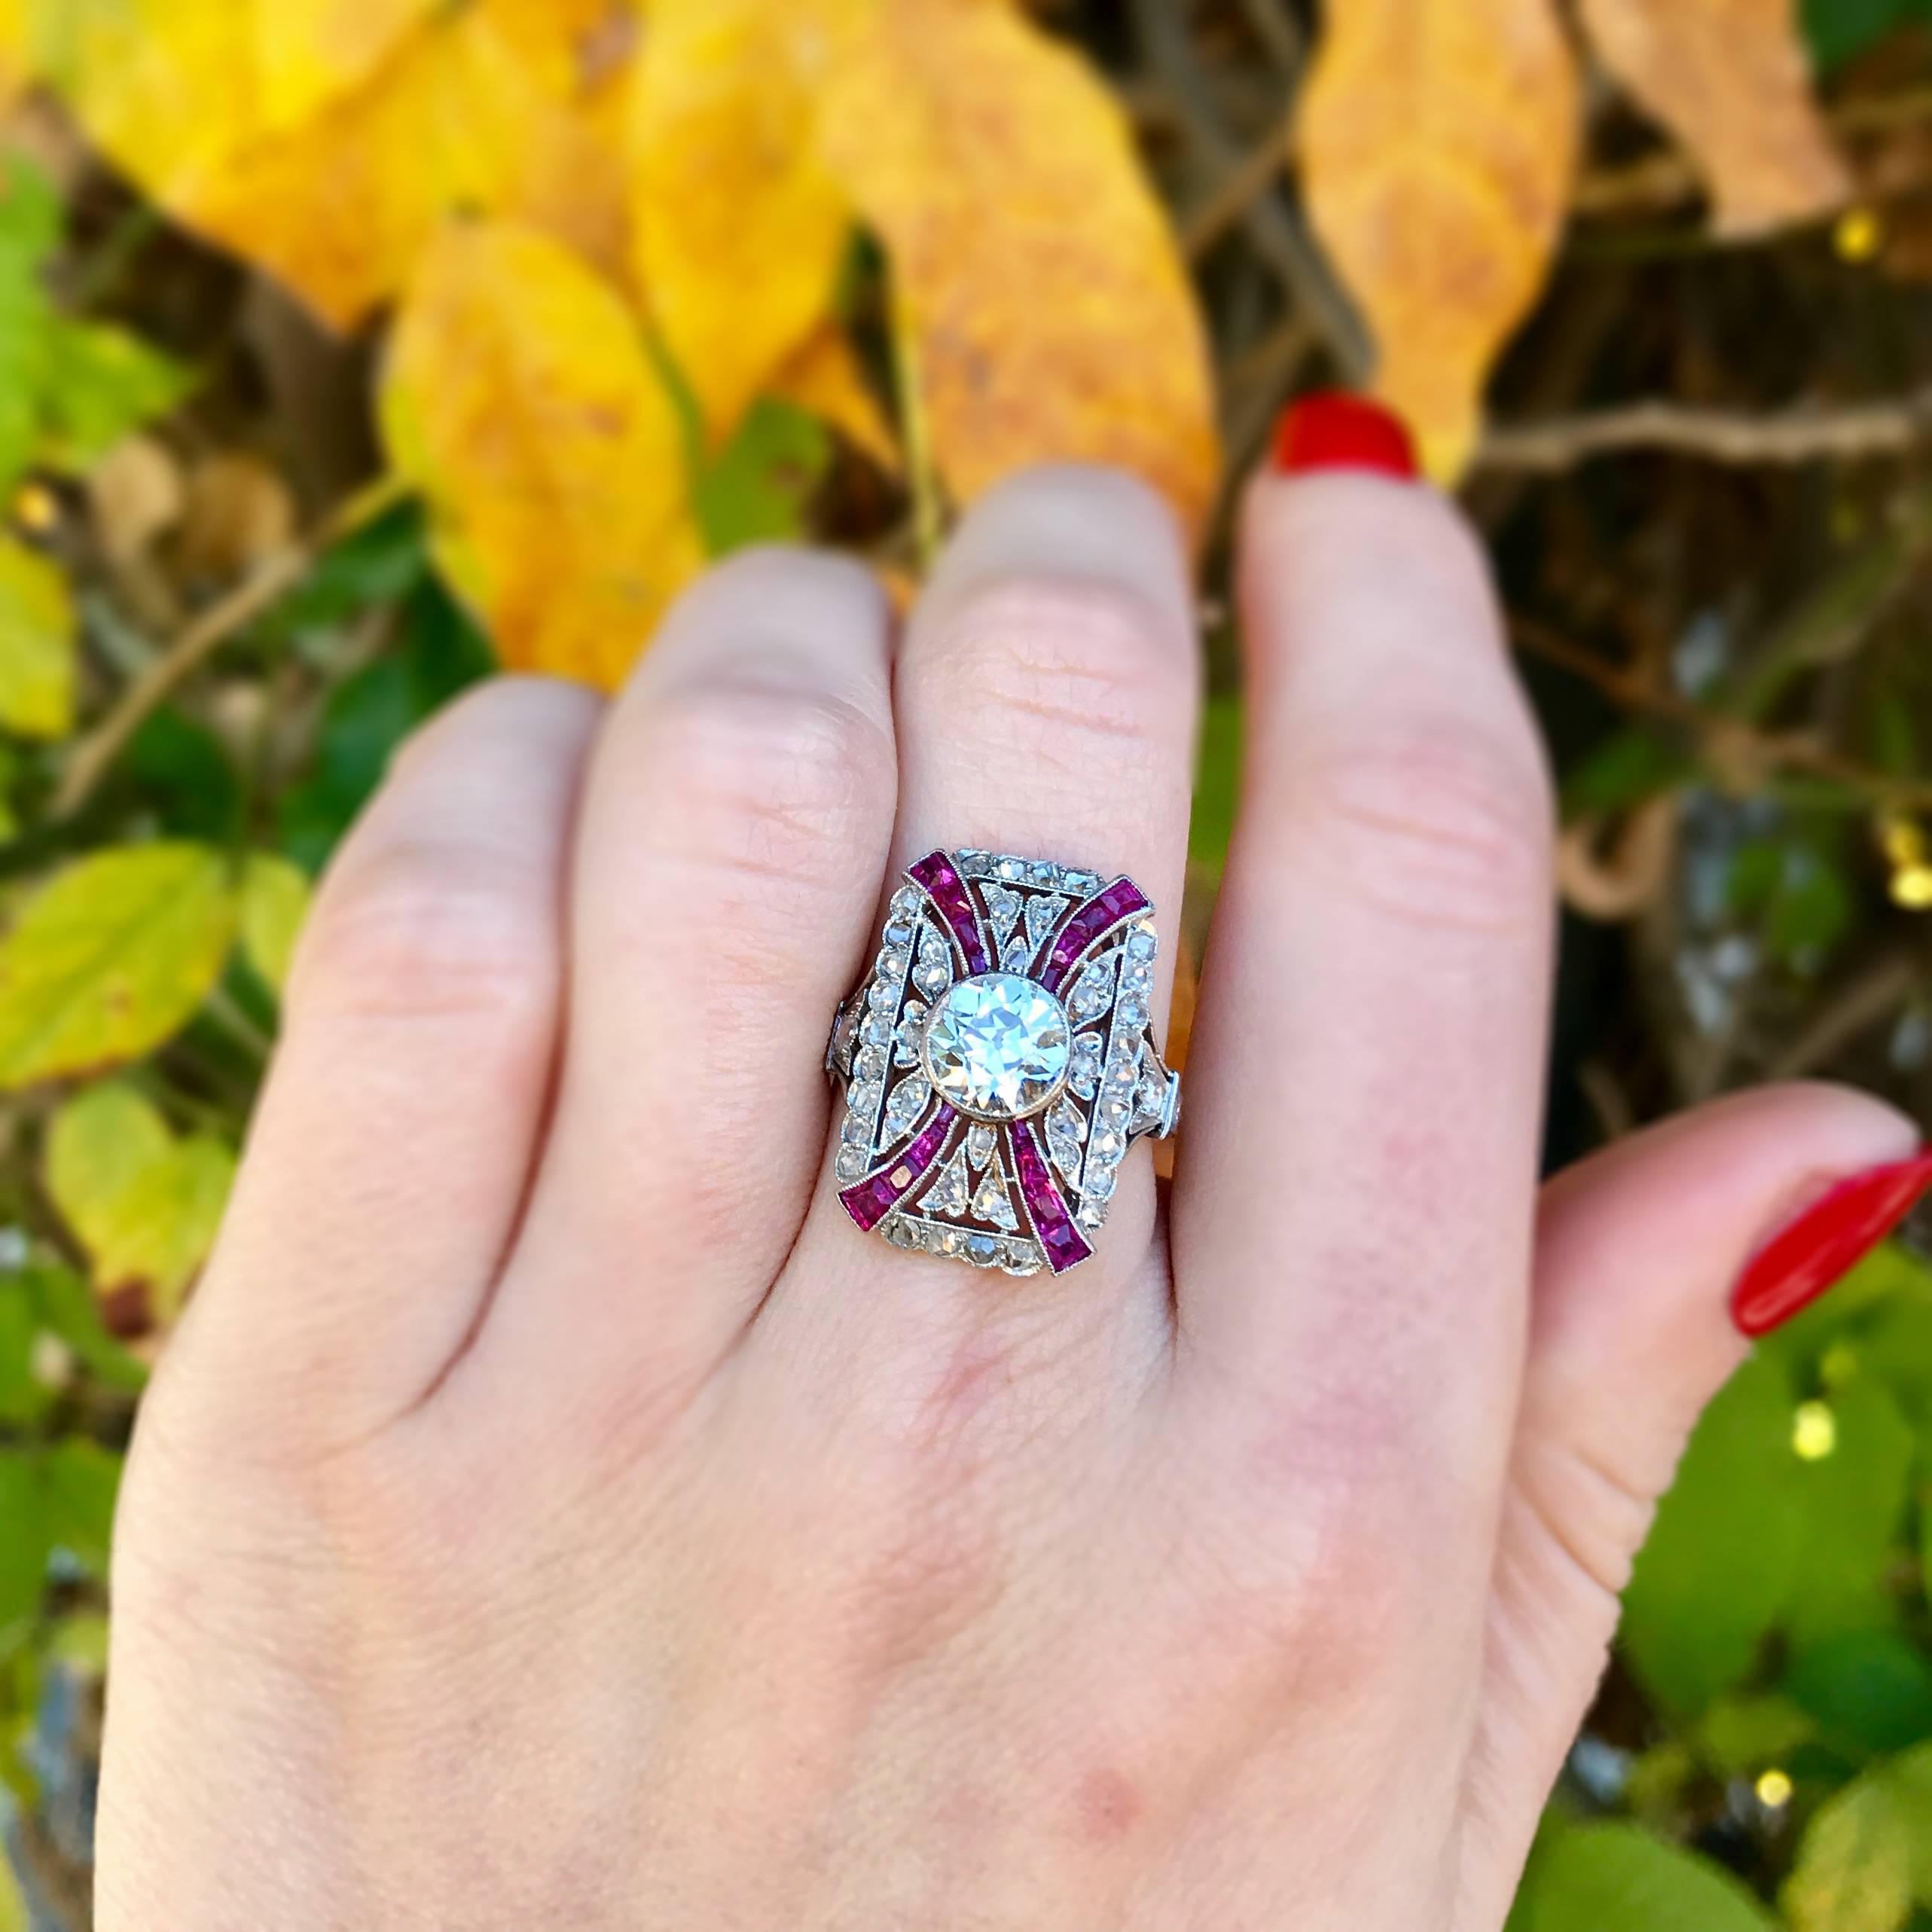 A stunning antique Edwardian diamond and ruby ring from circa 1910. This large platinum ring is studded with rose cut diamonds and four channels of rubies leading to a bezel set Old European Cut center diamond approximately 1.75 carats that is J in